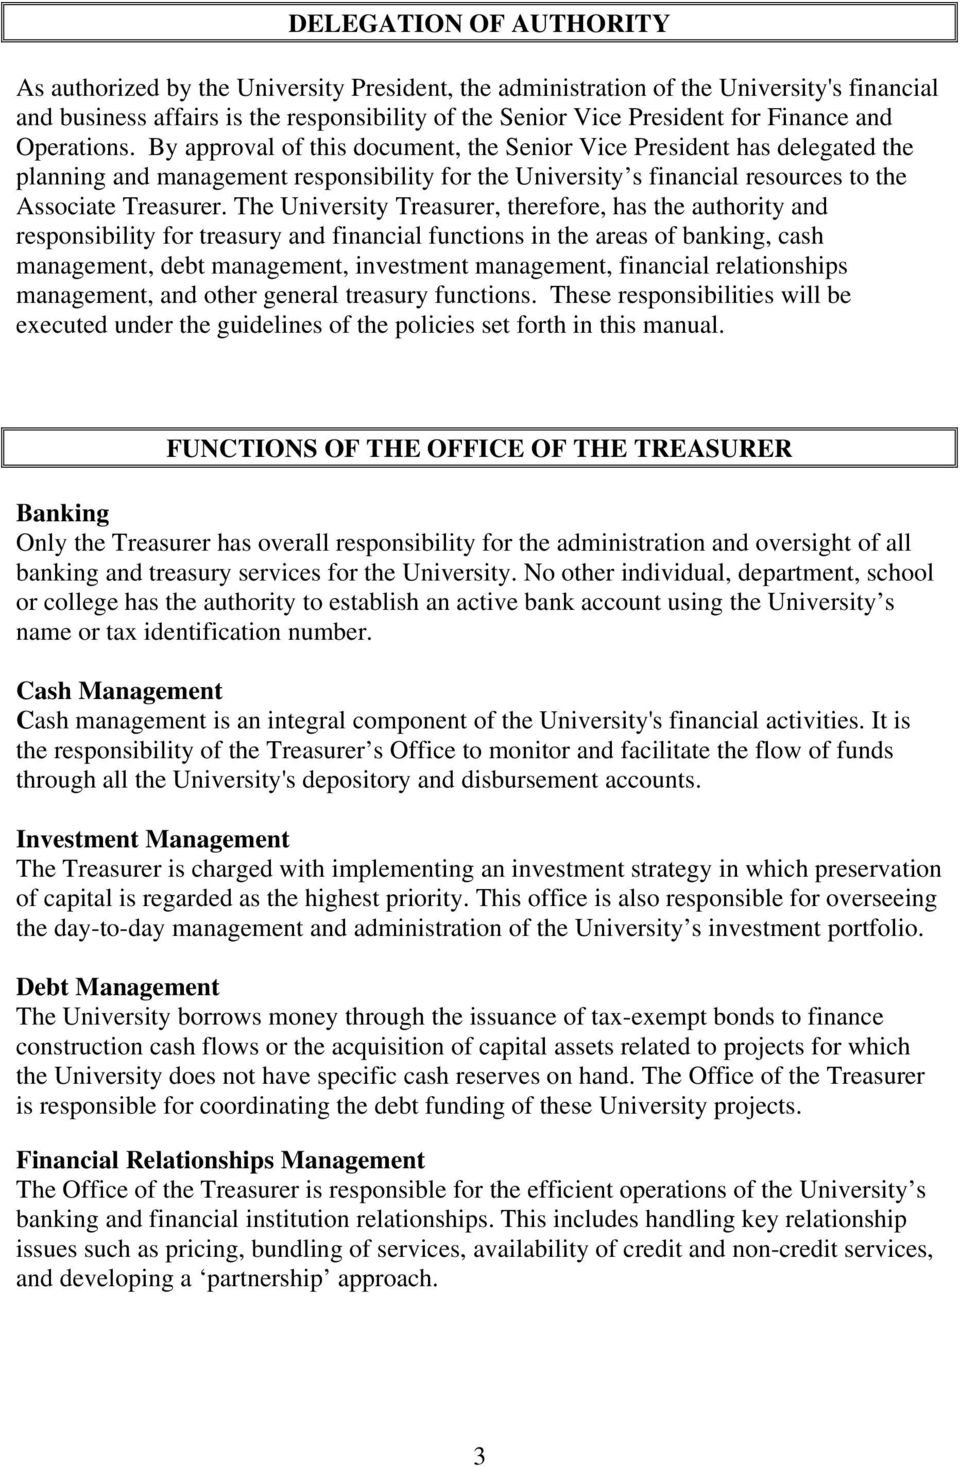 The University Treasurer, therefore, has the authority and responsibility for treasury and financial functions in the areas of banking, cash management, debt management, investment management,